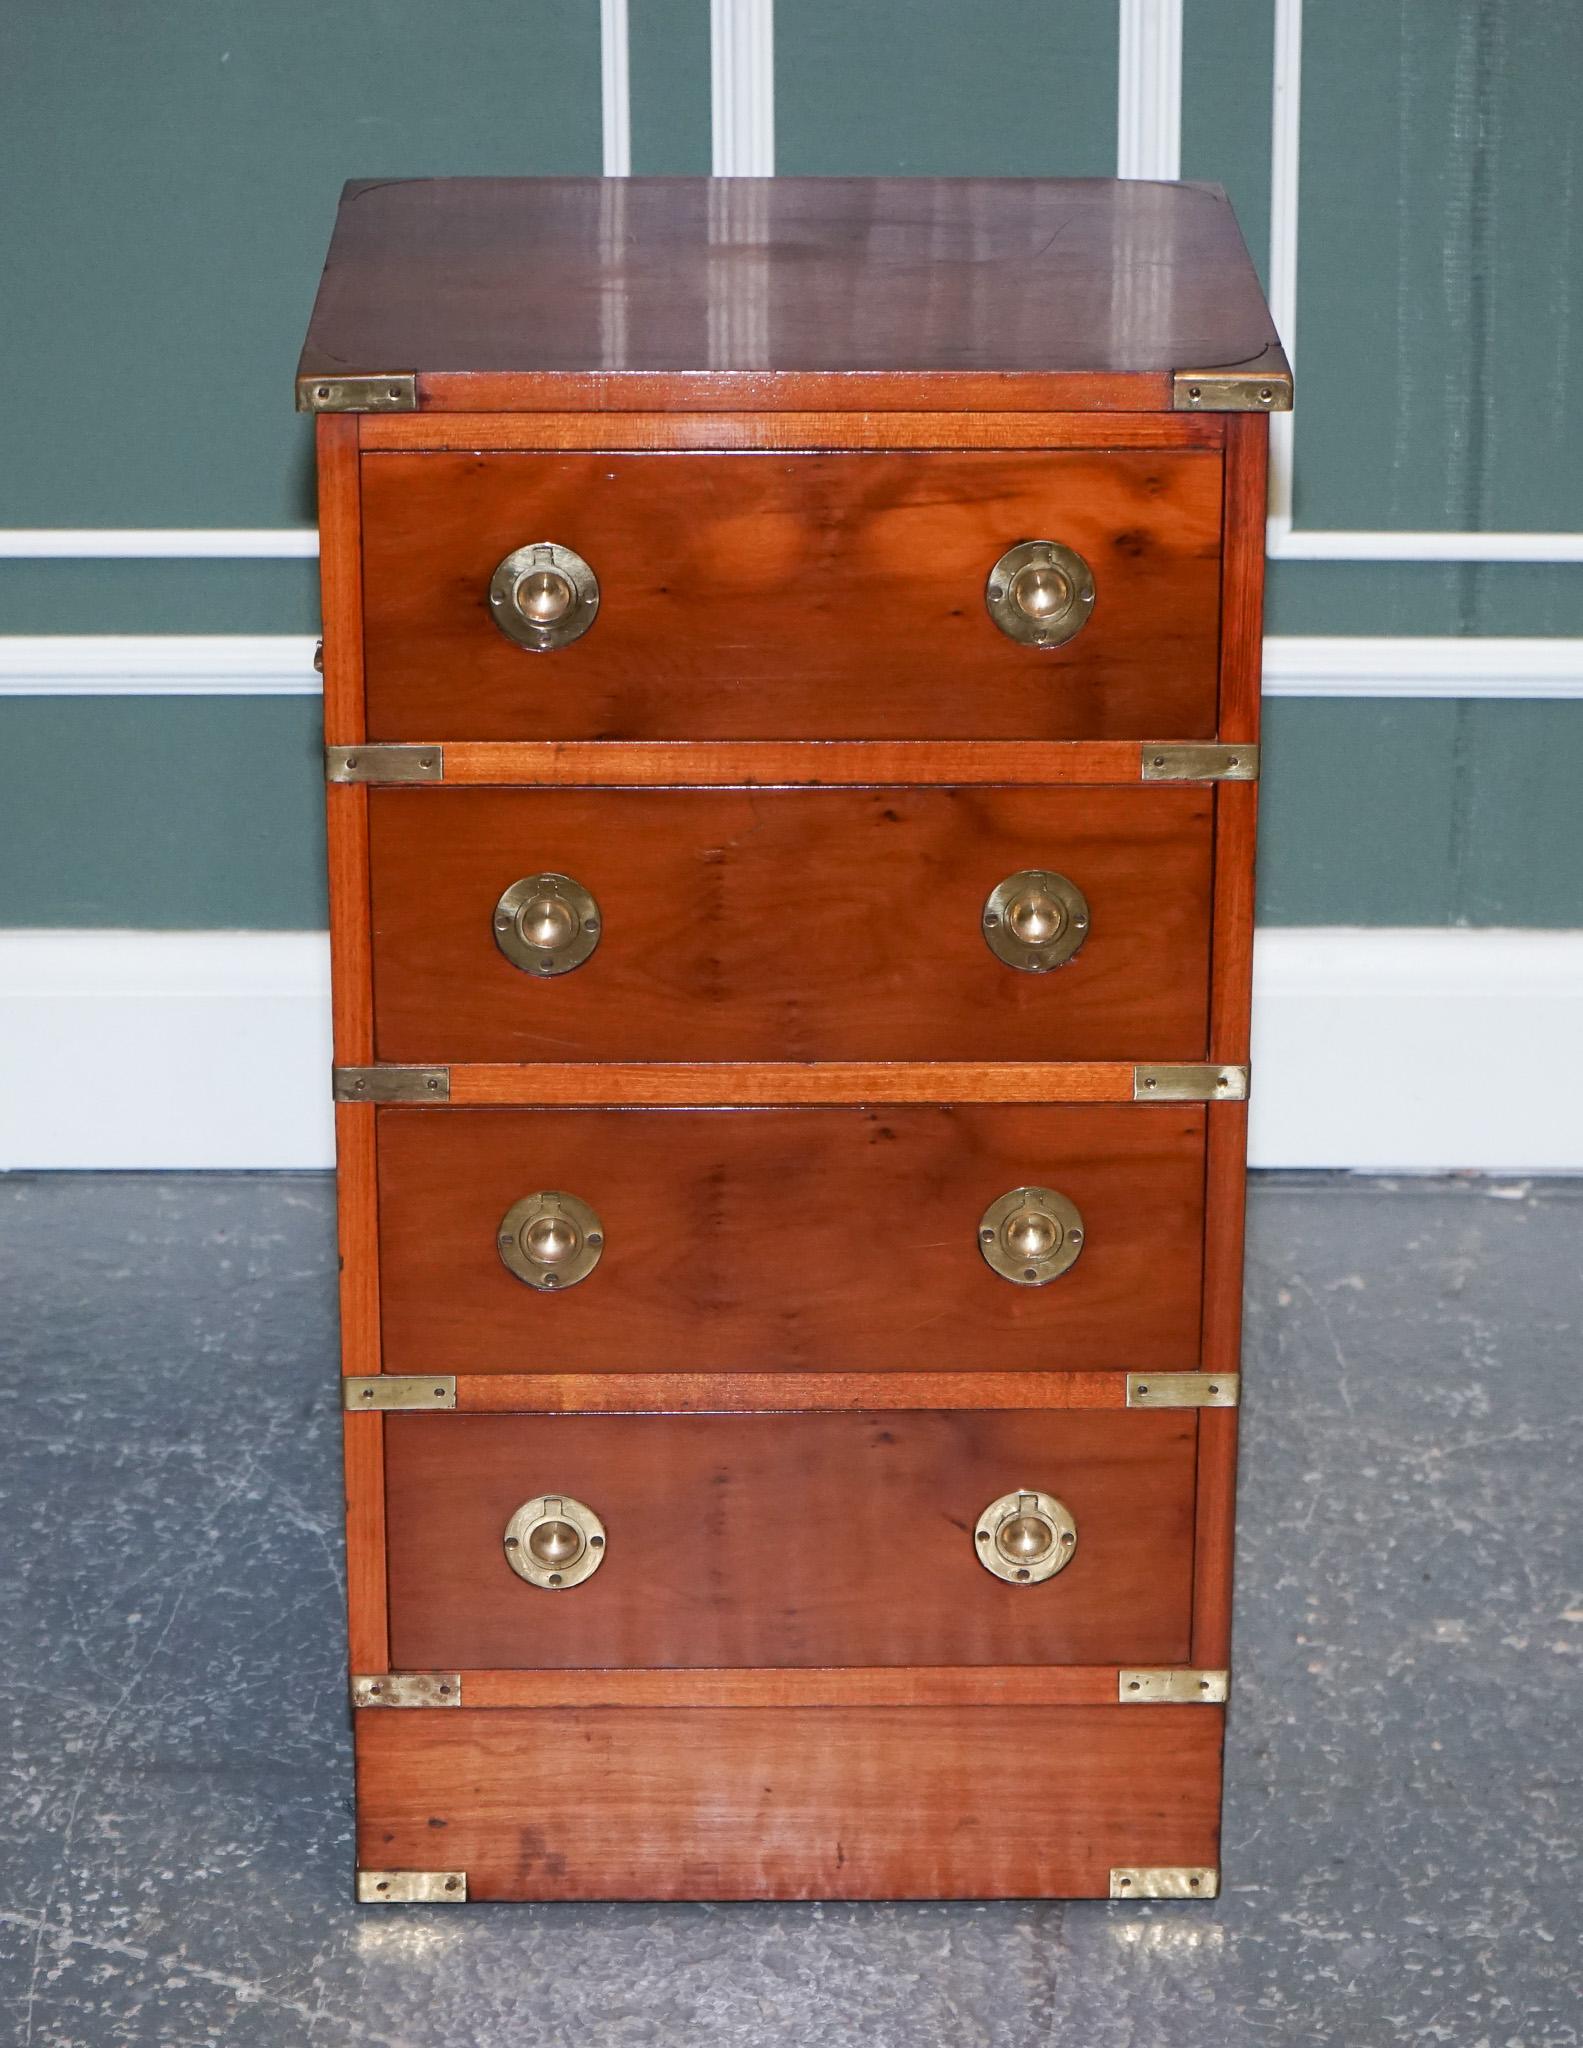 Hand-Crafted Vintage Yew Wood Military Campaign Chest of Drawers with 4 Drawers Brass Fitting